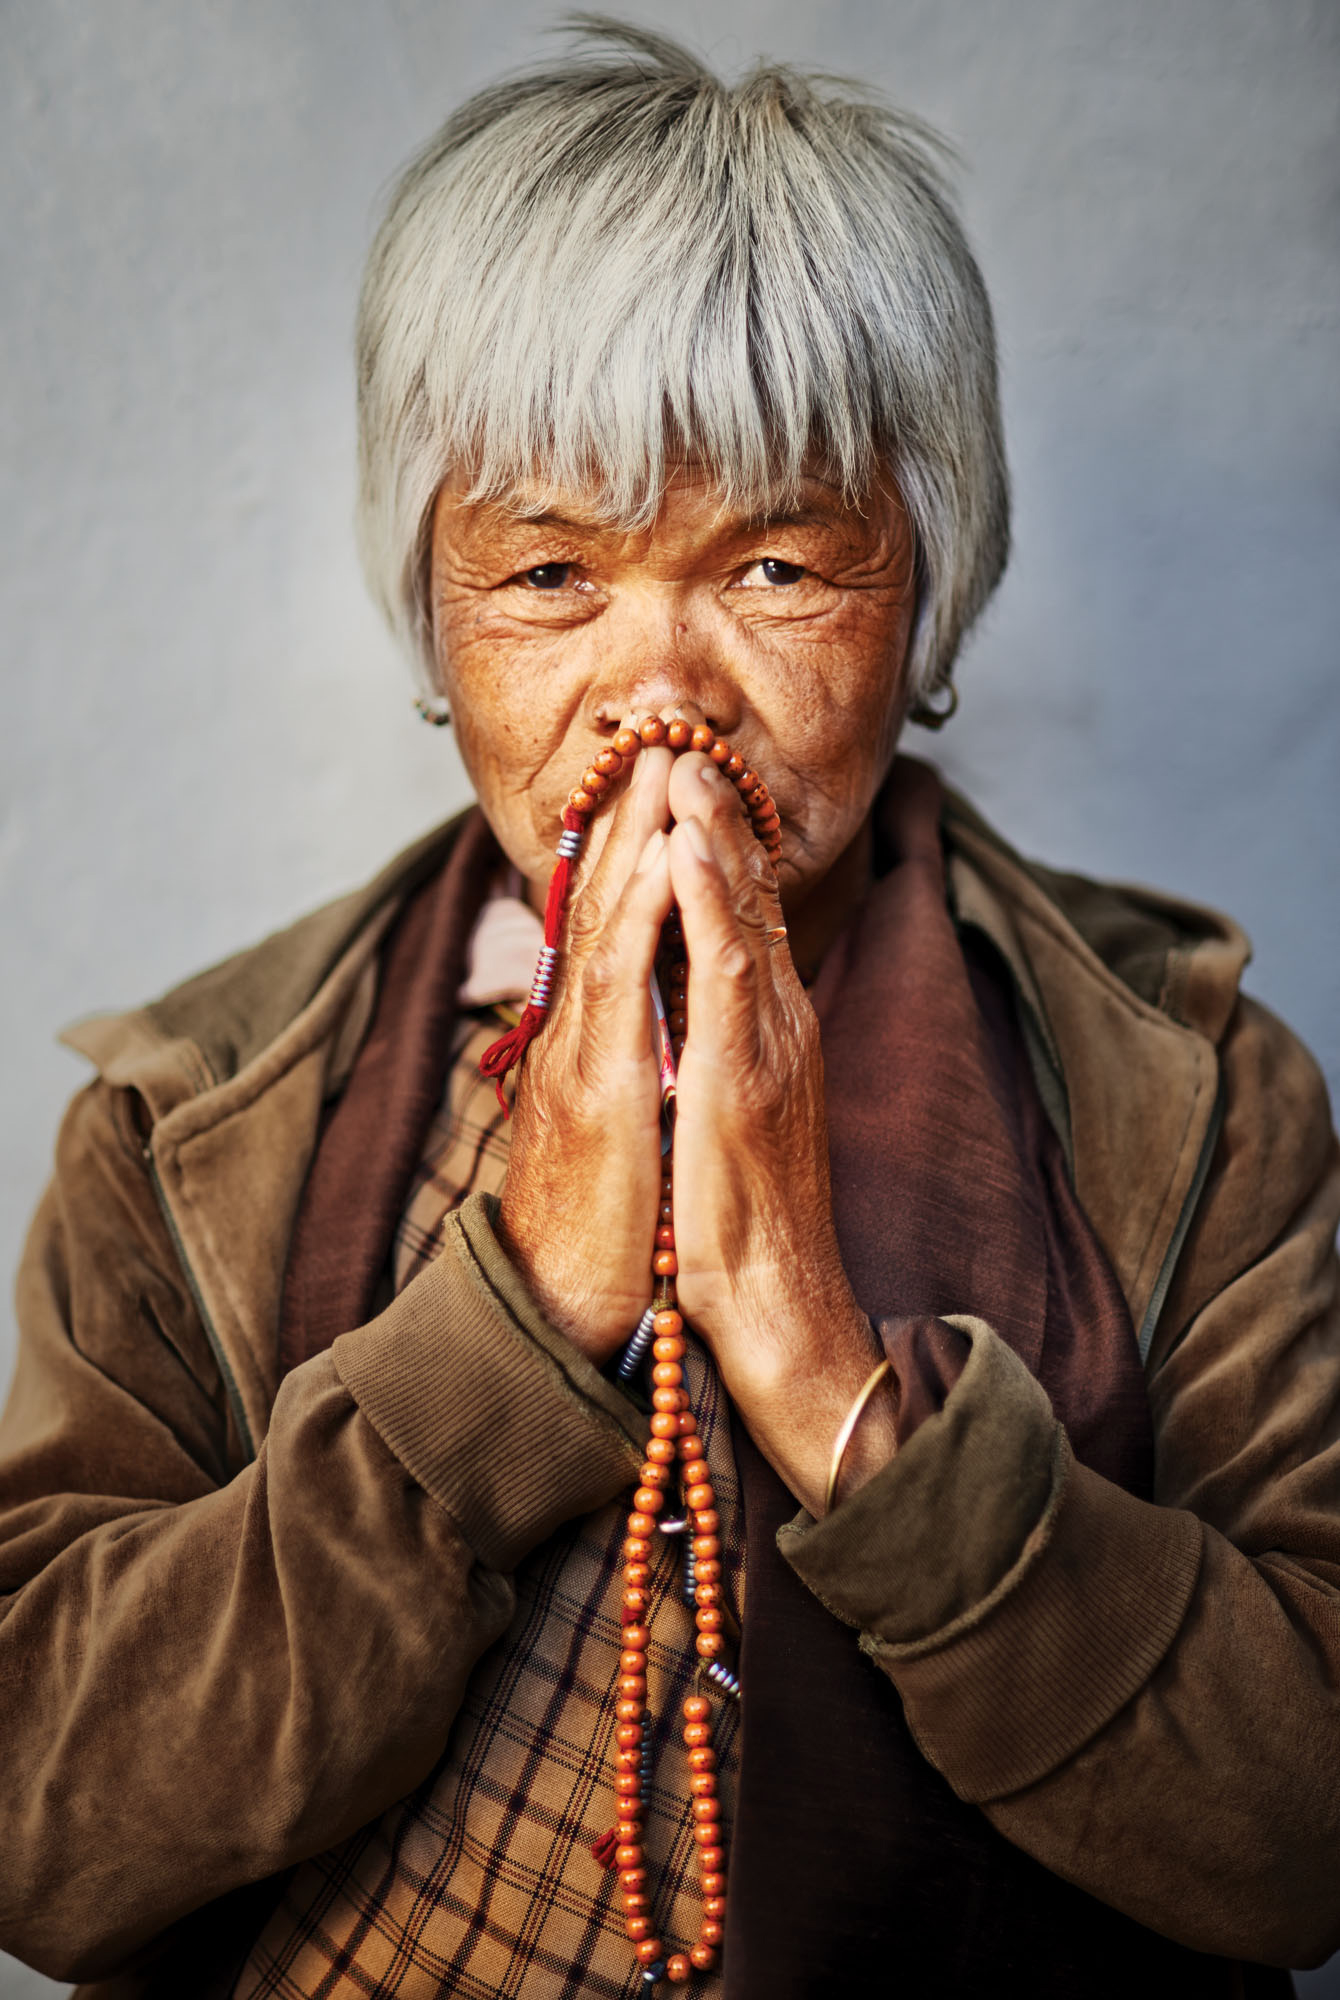 Lady praying, Bhutan. Should I have paid to take this photo? My conscience is clear! Nikon D800, 85mm lens, f2 @ 1/400 second, ISO 200.